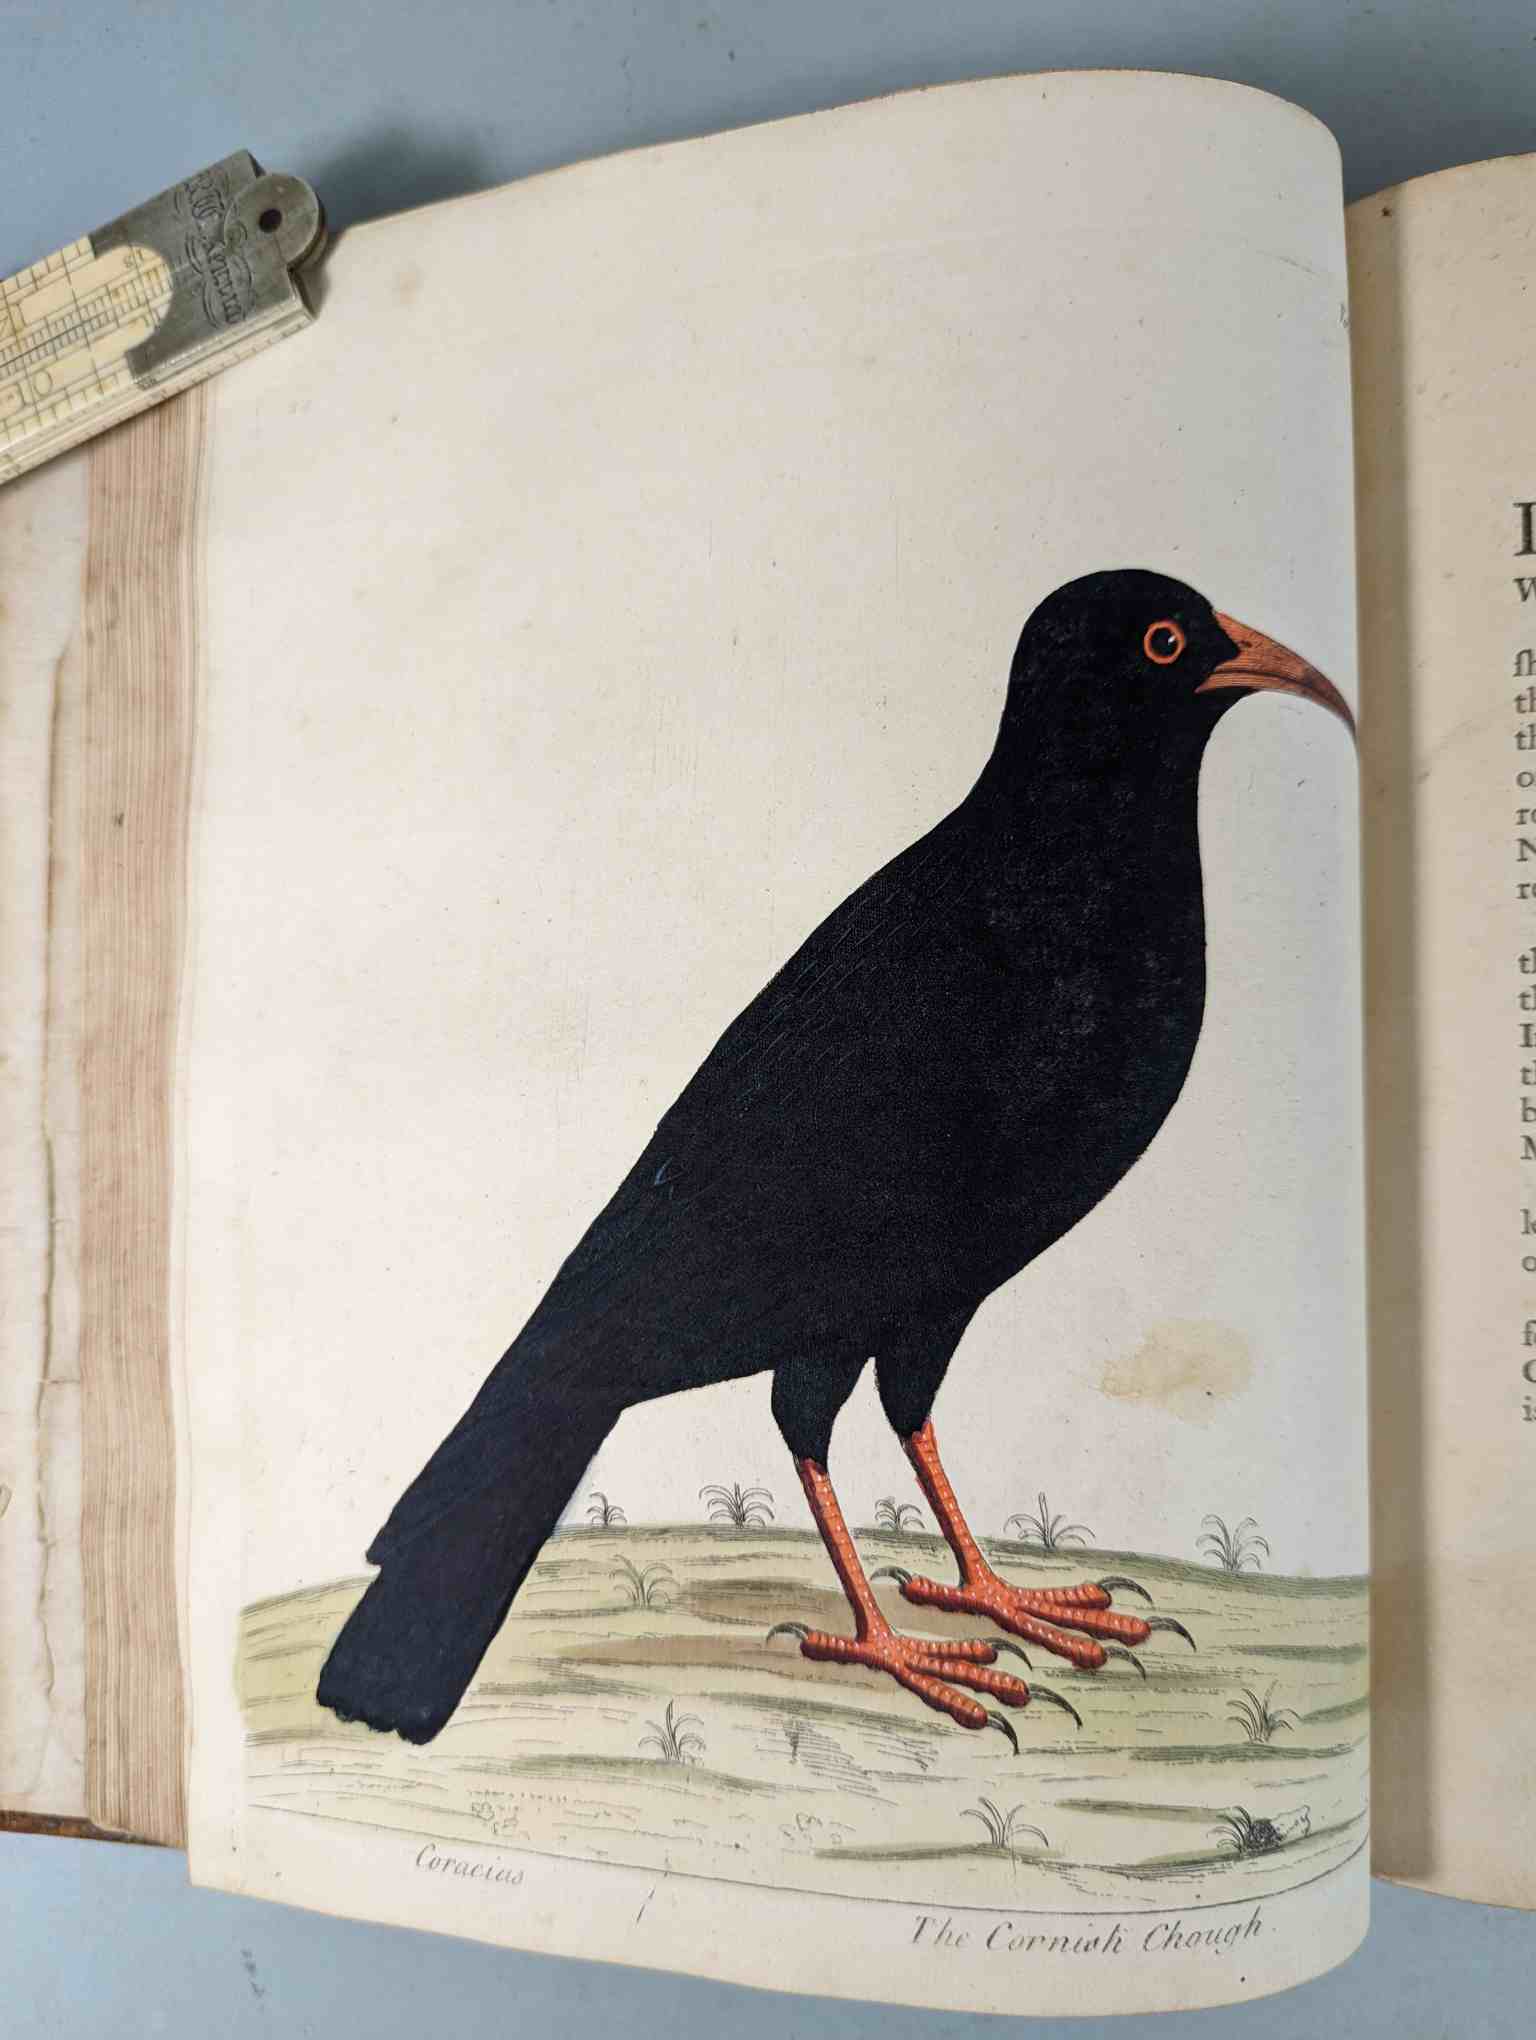 ALBIN, Eleazar. A Natural History of Birds, to which are added, Notes and Observations by W. - Image 128 of 208